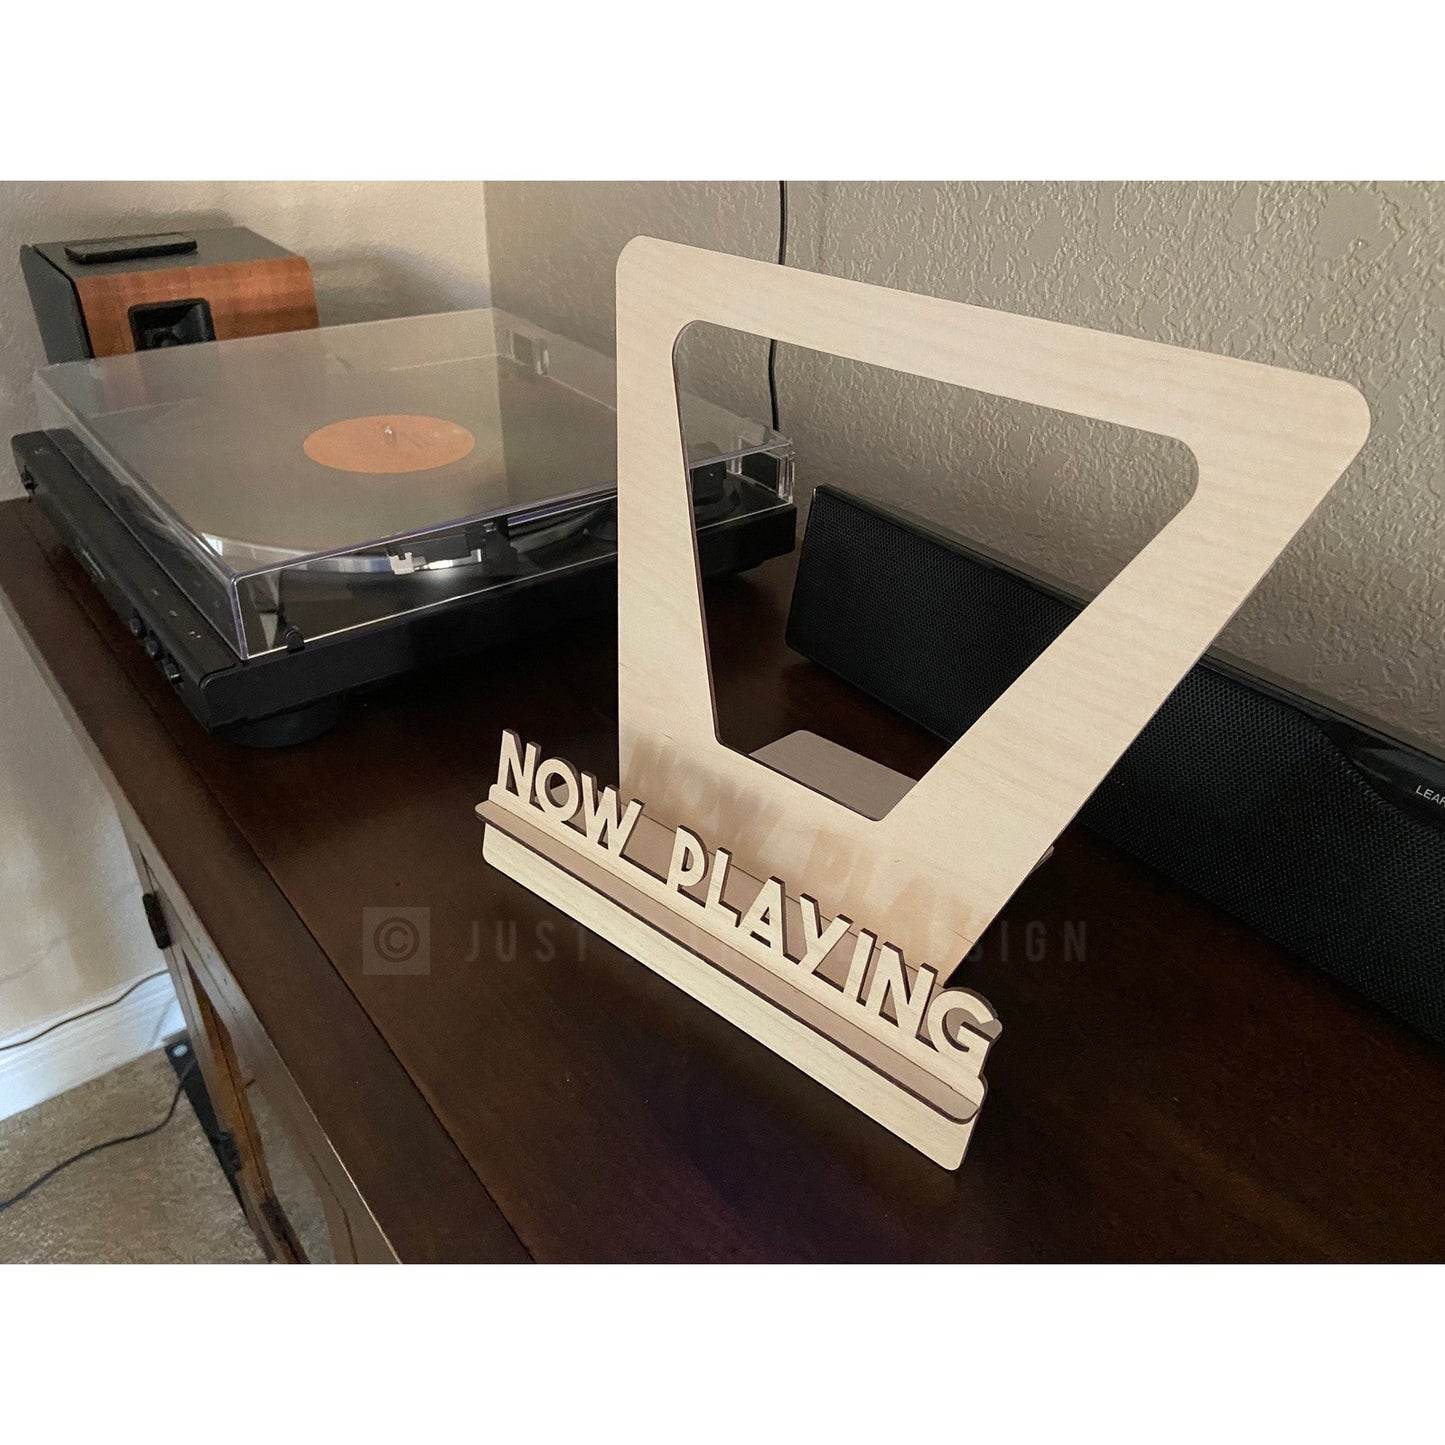 Vinyl Record Stand, Now Spinning Vinyl Record Stand, Vinyl Record Storage  Frame, LP Storage, Vinyl Record Display, Album Storage Display 